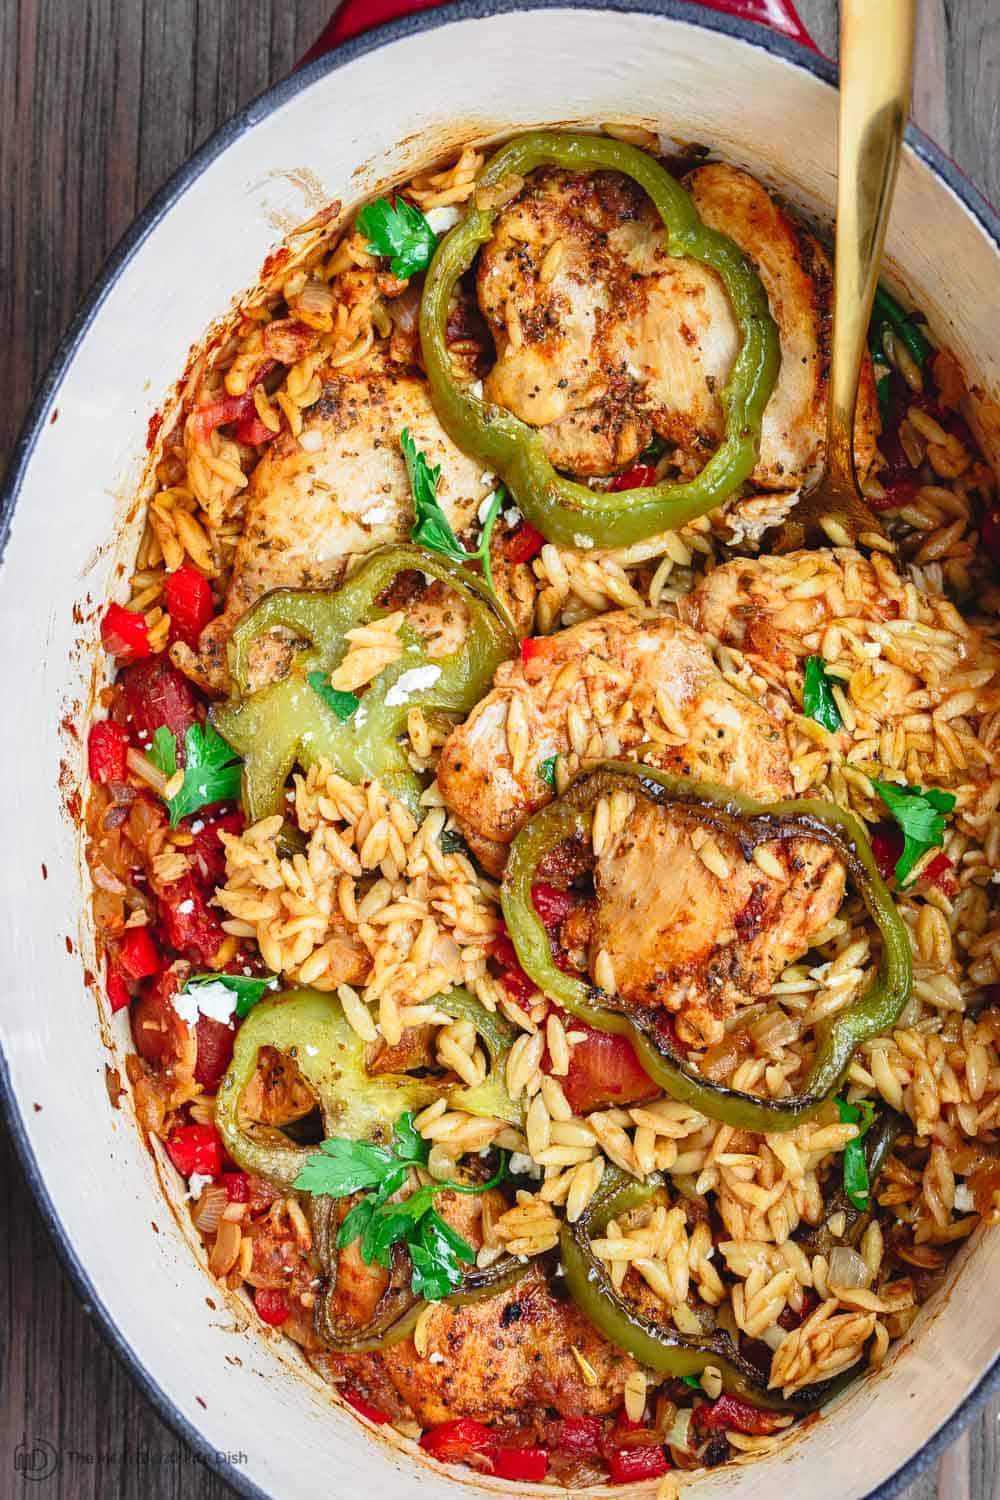 Greek Baked Chicken Orzo Recipe | The Mediterranean Dish. This is the perfect weeknight dinner! One-pot Greek chicken with orzo, onions, bell peppers, and tomato. And loads of Greek flavors. From themediterraneandish.com #greekfood #mediterraneanfood #mediterraneandiet #chickendinner #chickenrecipe #healthyrecipe #onepotdinner #easydinner